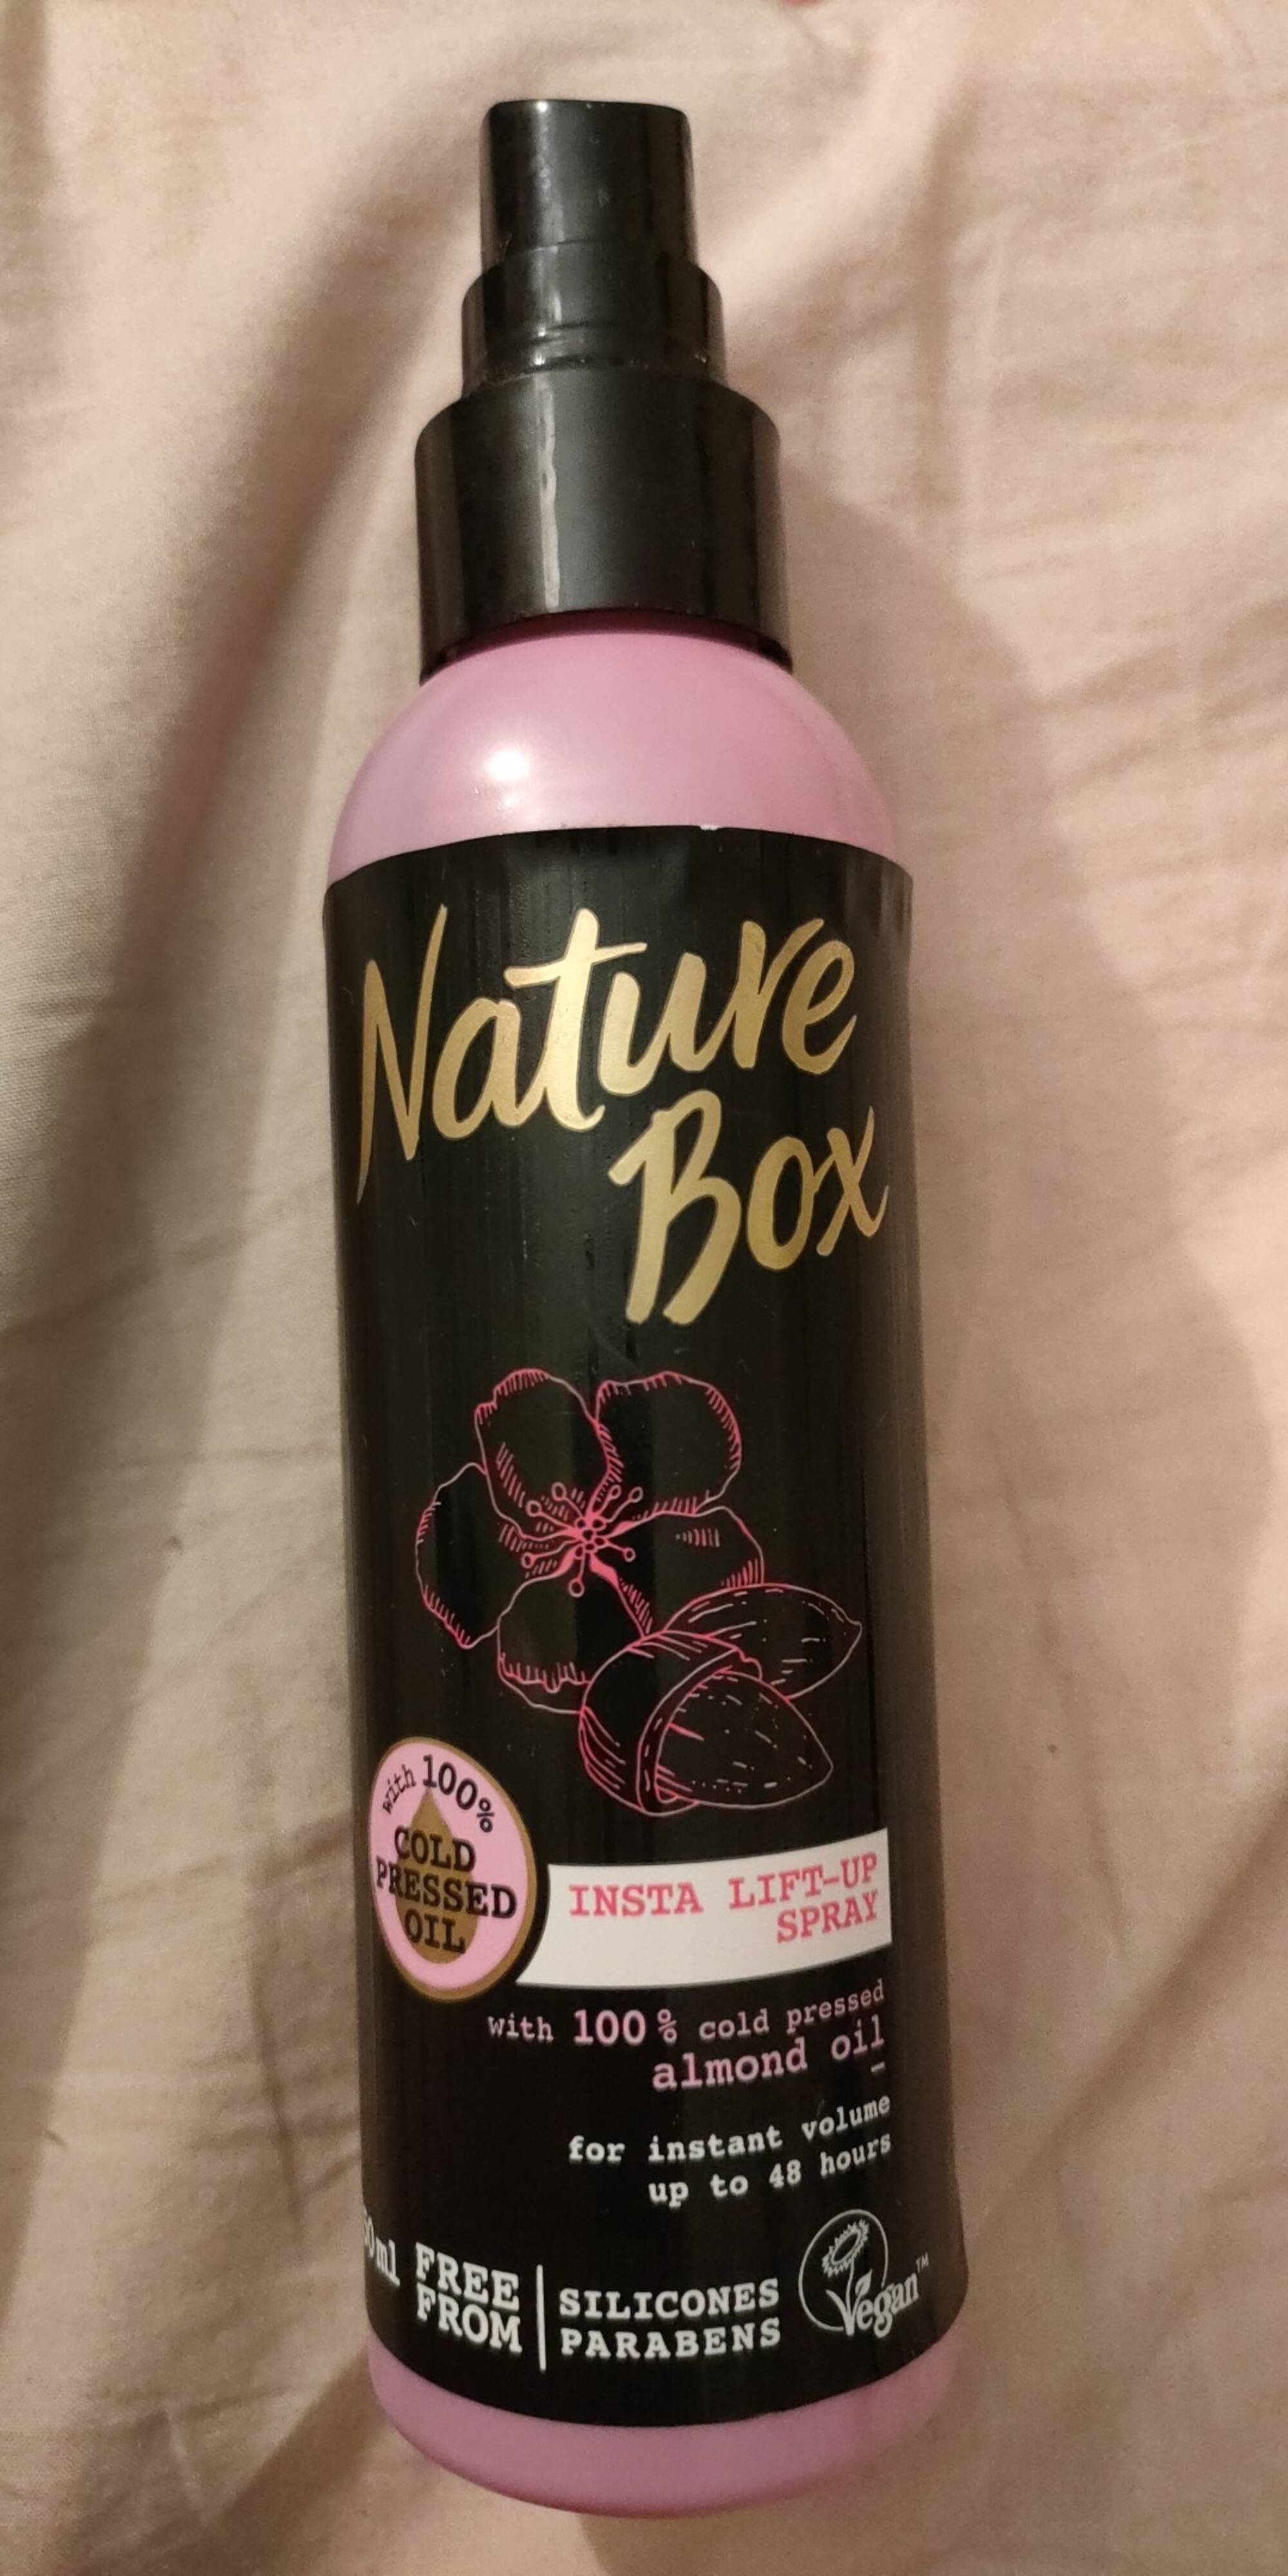 NATURE BOX - Insta lift-up spray for instant volume